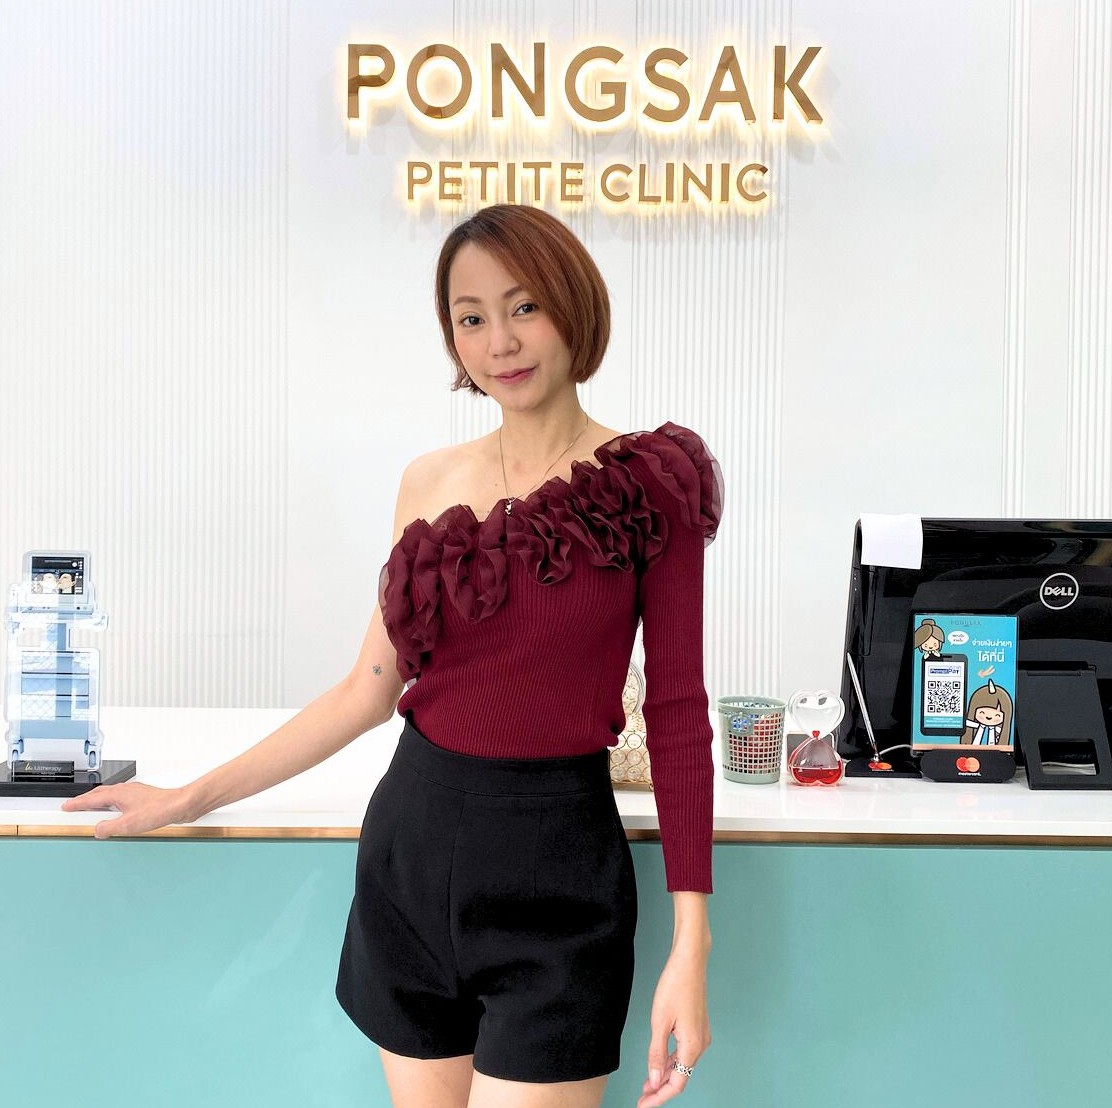 >> thermage_thermage_thermageflx_lifting_pongsakclinic